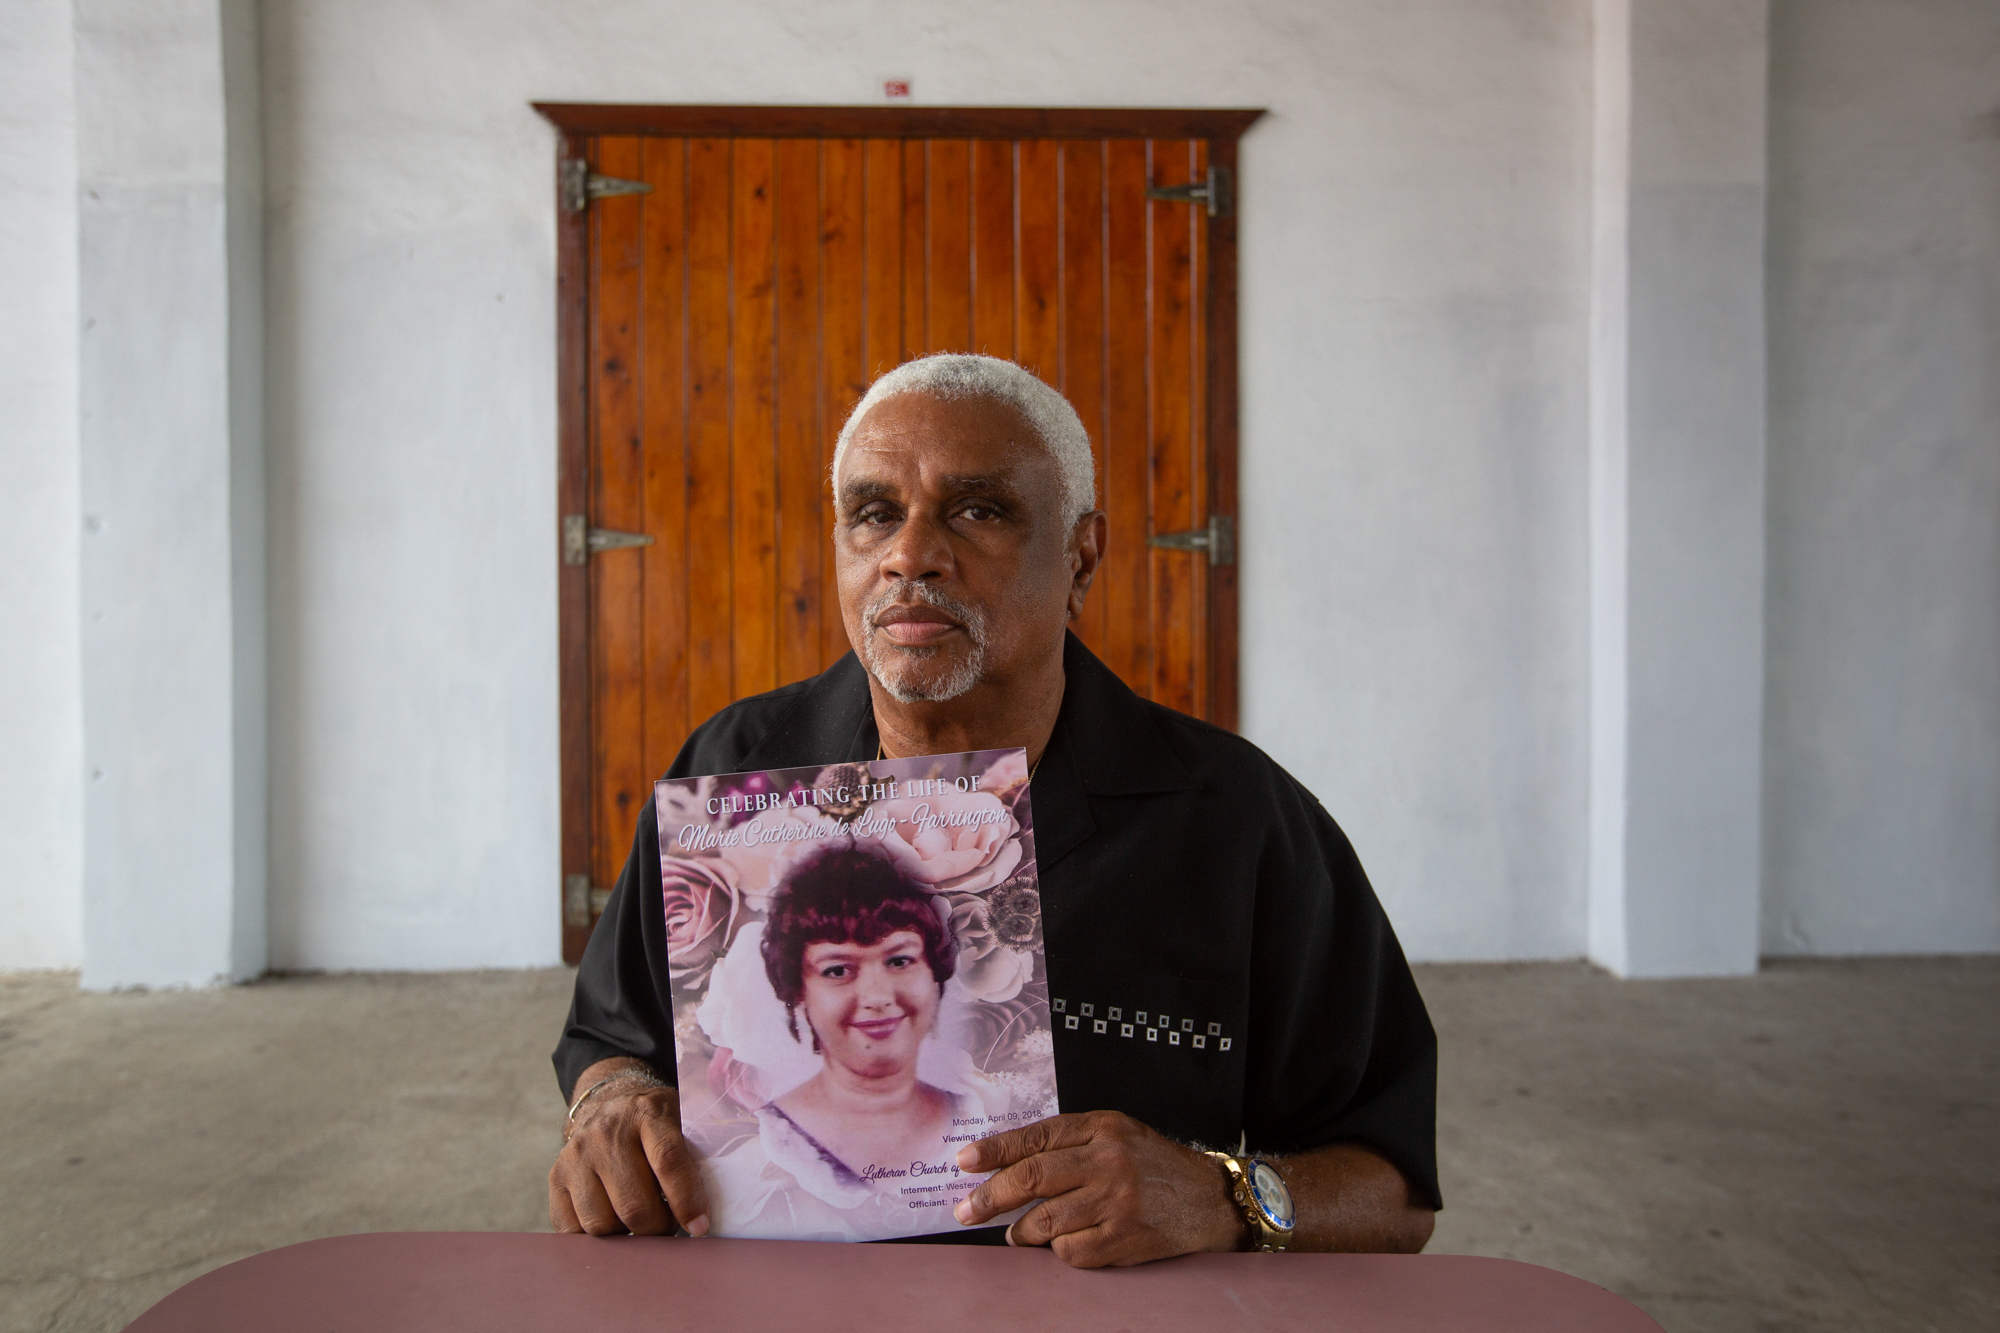 Michael Farrington - Michael Farrington of St. Thomas, U.S. Virgin Islands, holds a copy of his wife's funeral program. Marie Catherine de Lugo-Farrington was medically evacuated to Puerto Rico before Hurricane Irma, then evacuated to the mainland before Hurricane Maria hit Puerto Rico. She died shortly after Farrington brought her home to St. Thomas. He says FEMA did a poor job of tracking patients who were medically evacuated. (Anya Magnuson/News21)